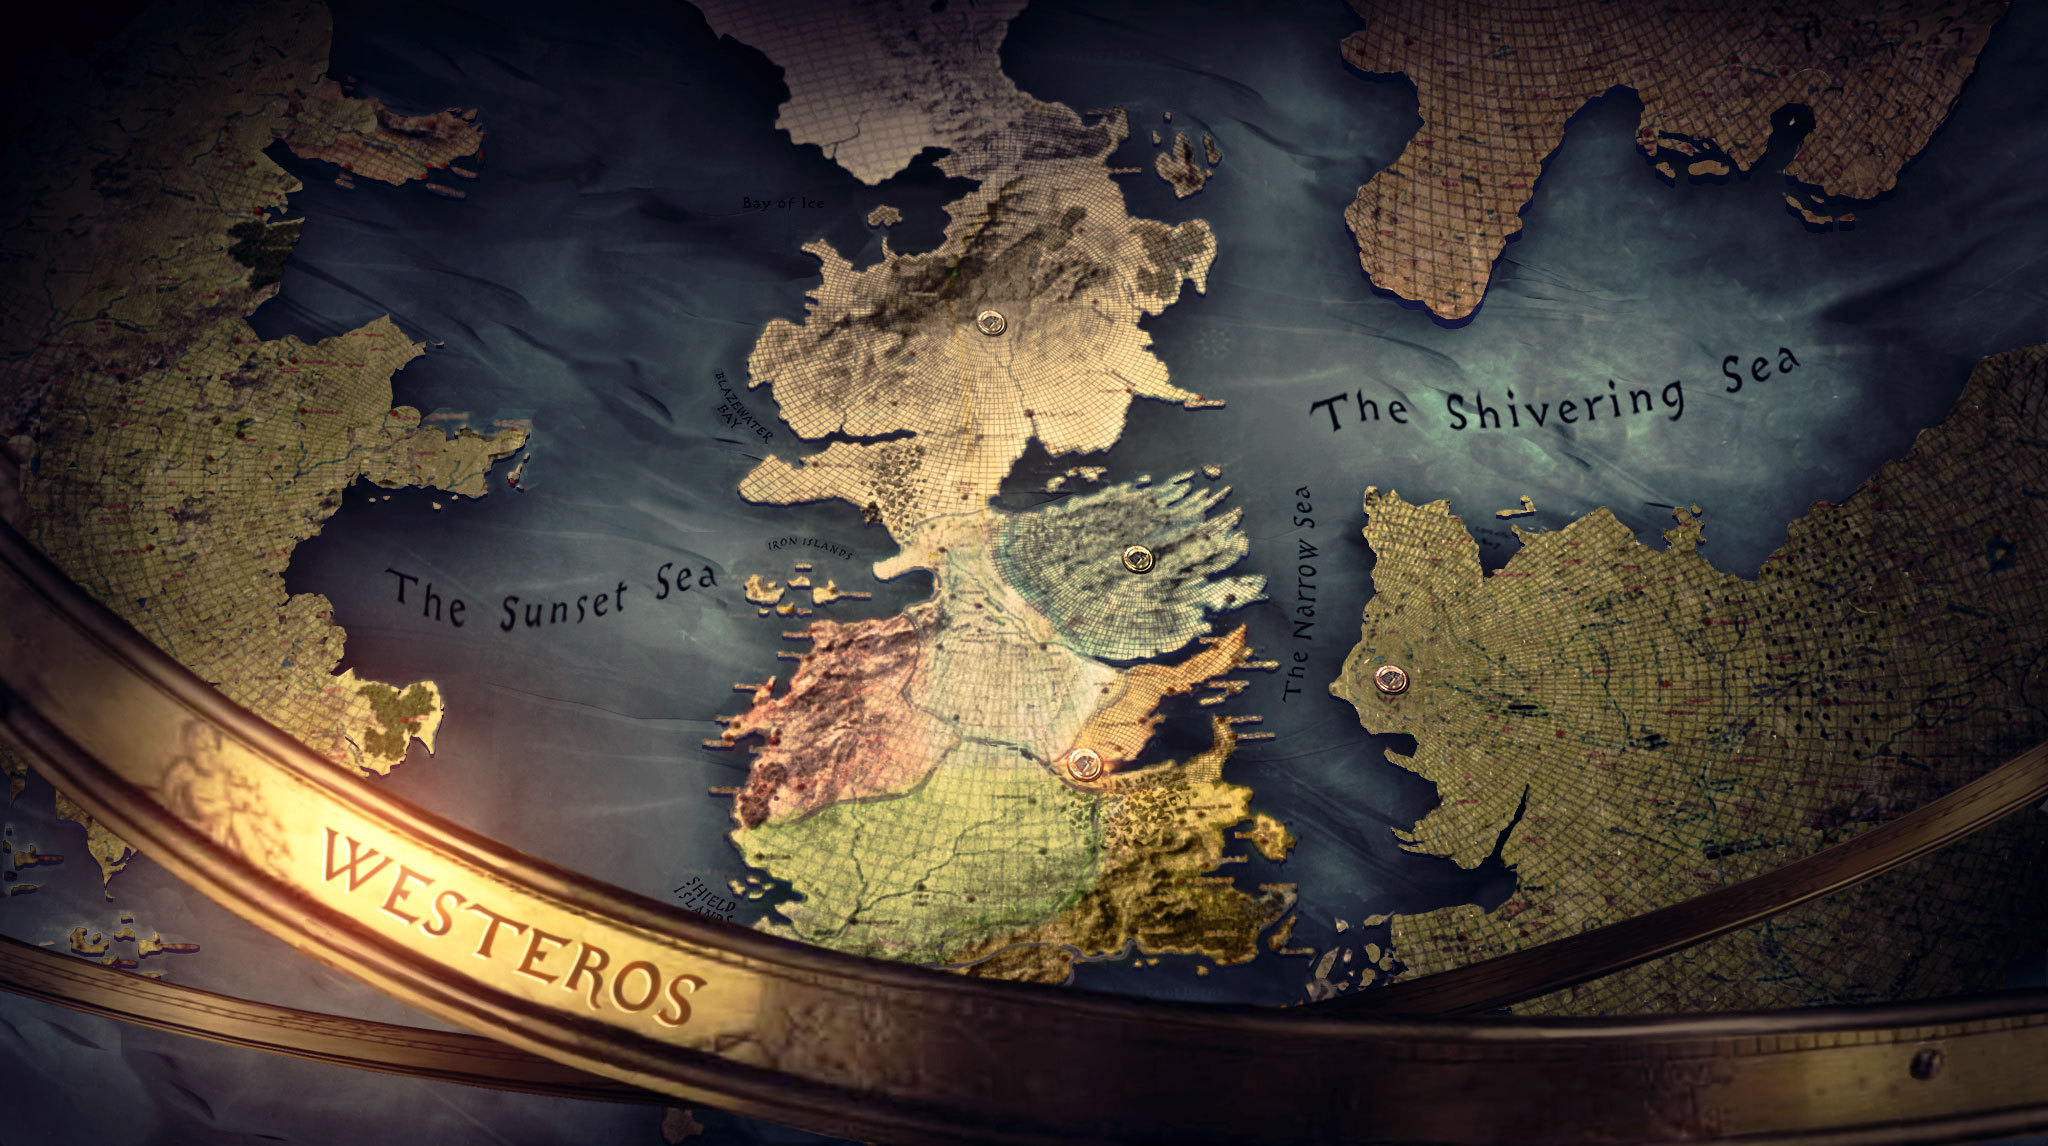 Opening Game of Thrones Map Game Of Thrones Wallpapers